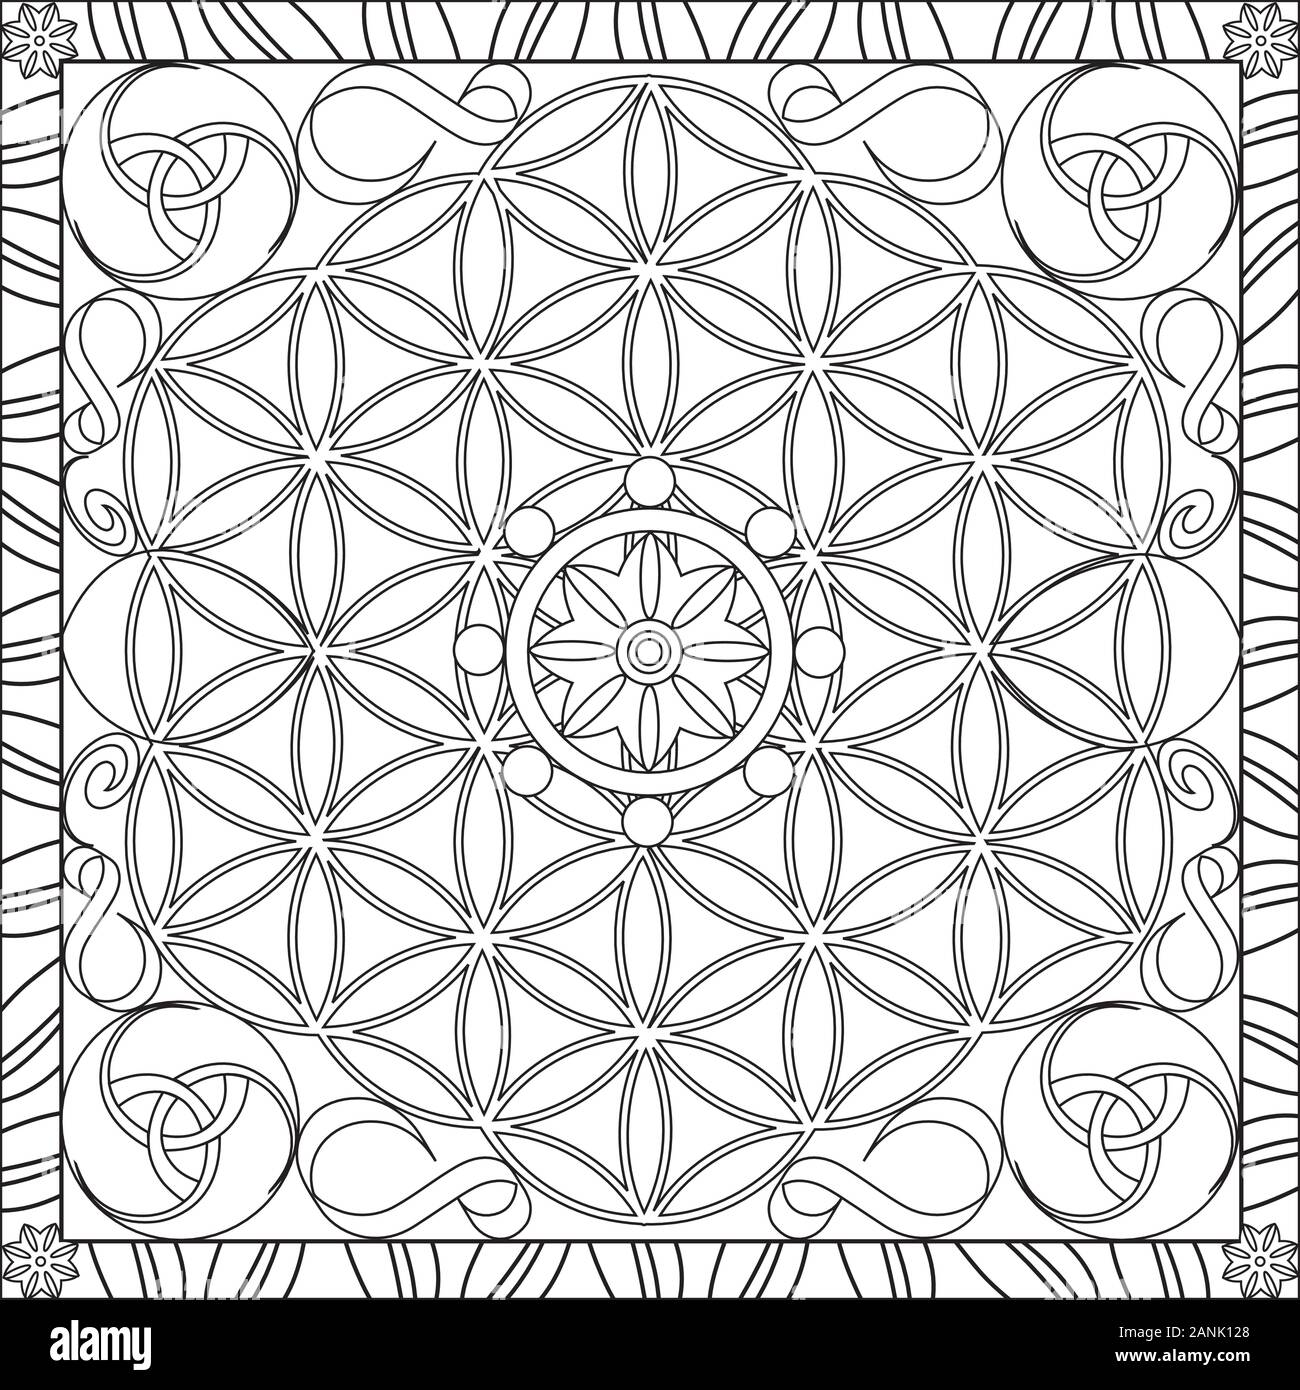 Coloring Page Illustration in Square Format - Mandala Flower of Life Wheel - De-Stress and Relax - Black and White Stock Vector